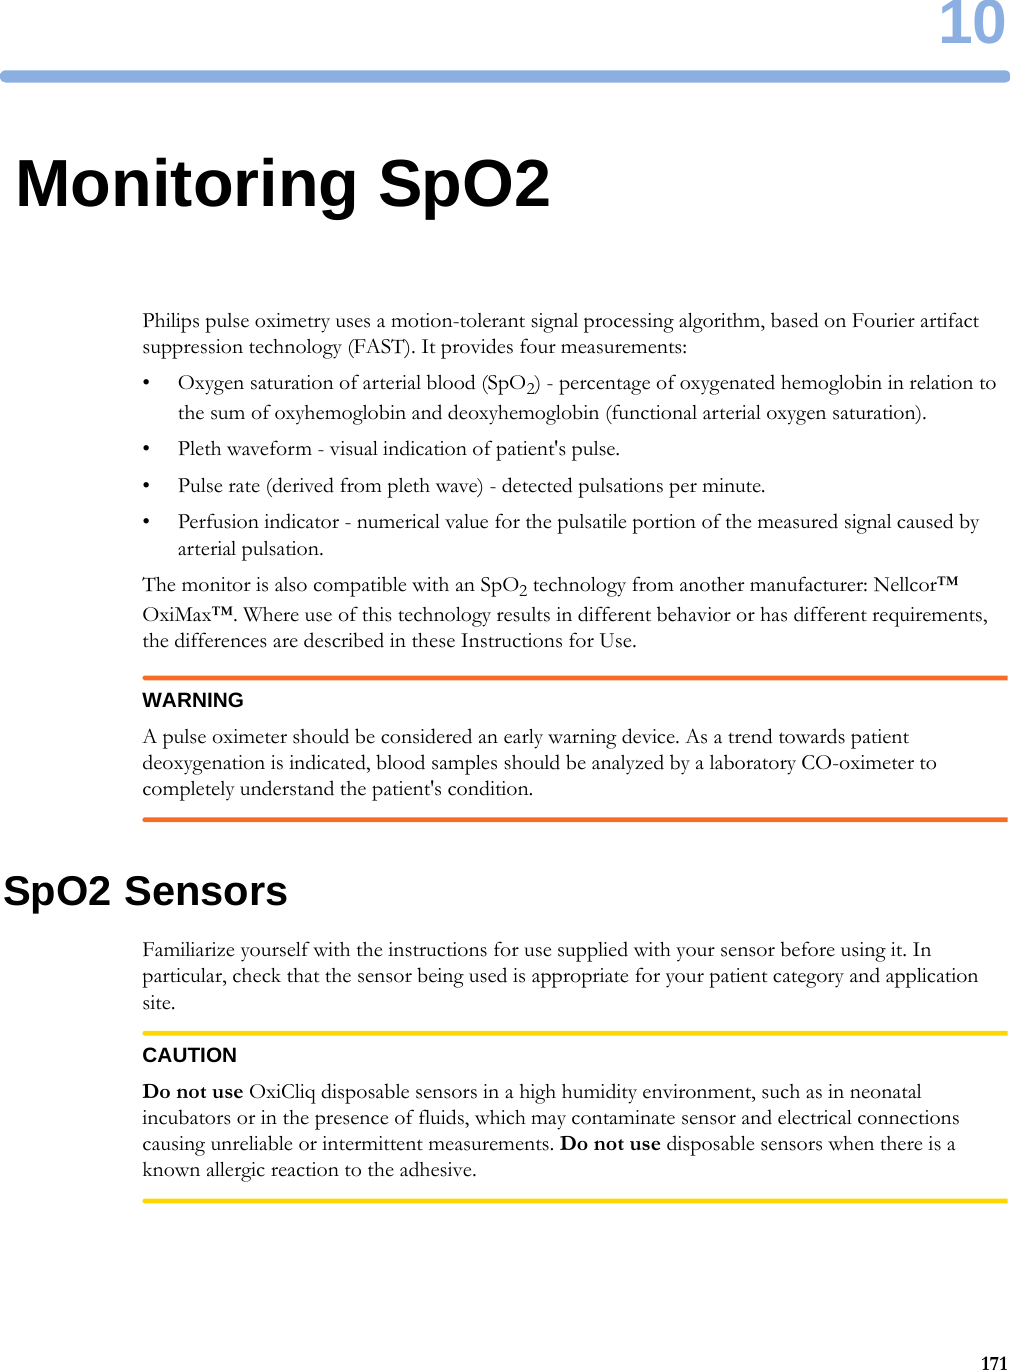 1017110Monitoring SpO2Philips pulse oximetry uses a motion-tolerant signal processing algorithm, based on Fourier artifact suppression technology (FAST). It provides four measurements:• Oxygen saturation of arterial blood (SpO2) - percentage of oxygenated hemoglobin in relation to the sum of oxyhemoglobin and deoxyhemoglobin (functional arterial oxygen saturation).• Pleth waveform - visual indication of patient&apos;s pulse.• Pulse rate (derived from pleth wave) - detected pulsations per minute.• Perfusion indicator - numerical value for the pulsatile portion of the measured signal caused by arterial pulsation.The monitor is also compatible with an SpO2 technology from another manufacturer: Nellcor™ OxiMax™. Where use of this technology results in different behavior or has different requirements, the differences are described in these Instructions for Use.WARNINGA pulse oximeter should be considered an early warning device. As a trend towards patient deoxygenation is indicated, blood samples should be analyzed by a laboratory CO-oximeter to completely understand the patient&apos;s condition.SpO2 SensorsFamiliarize yourself with the instructions for use supplied with your sensor before using it. In particular, check that the sensor being used is appropriate for your patient category and application site.CAUTIONDo not use OxiCliq disposable sensors in a high humidity environment, such as in neonatal incubators or in the presence of fluids, which may contaminate sensor and electrical connections causing unreliable or intermittent measurements. Do not use disposable sensors when there is a known allergic reaction to the adhesive.